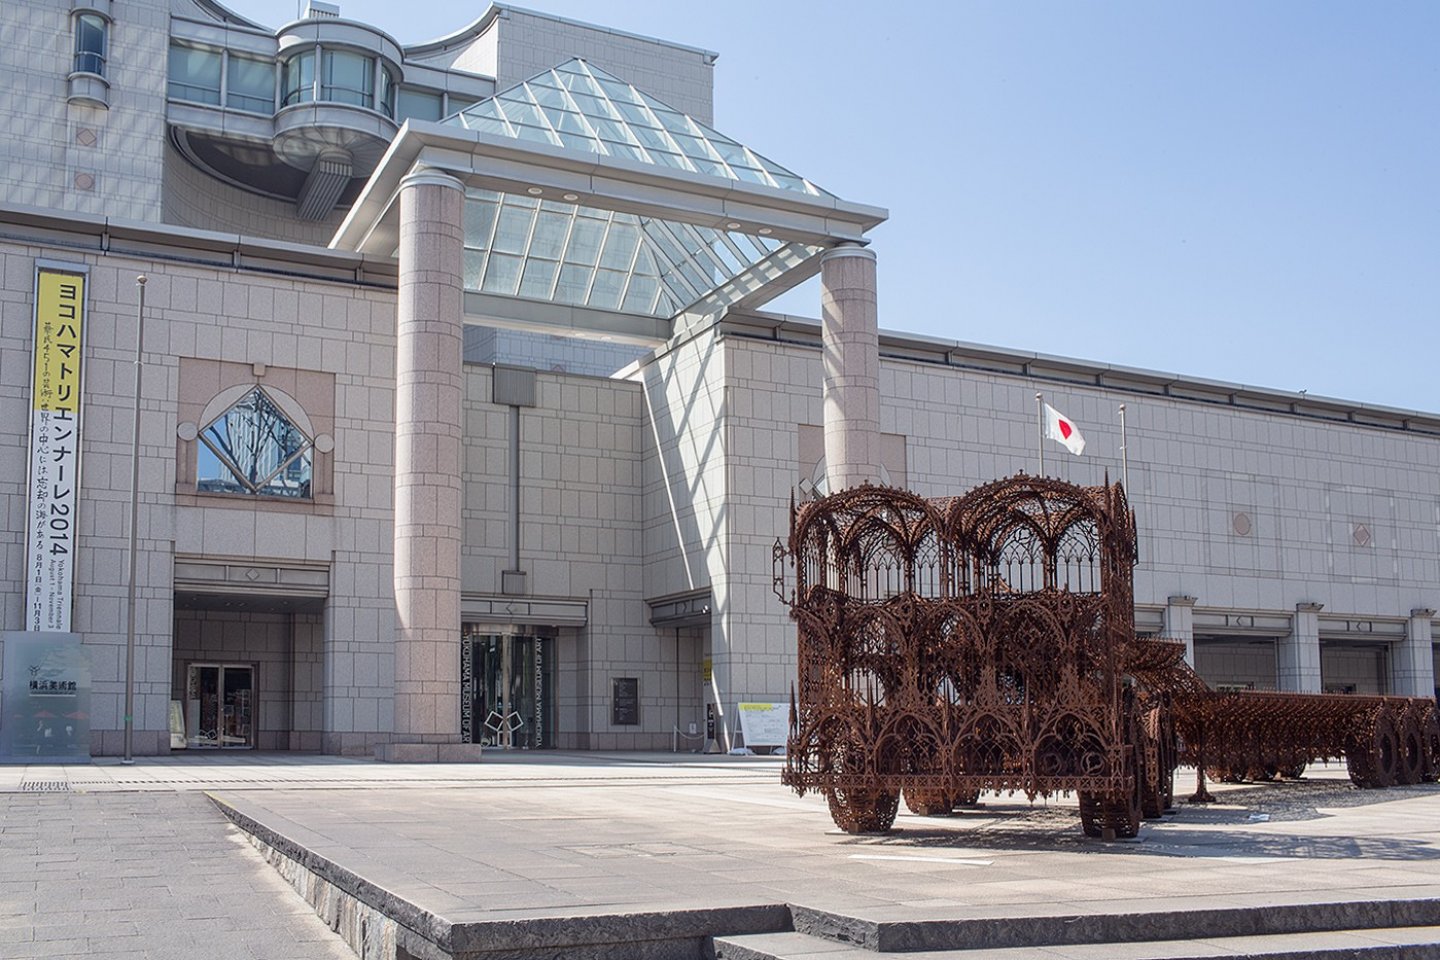 'Flatbed Trailer' (2007) is one of the most impressive monuments at the Yokohama Triennale 2014 and stands in front of the entrance to the Yokohama Art Museum. 